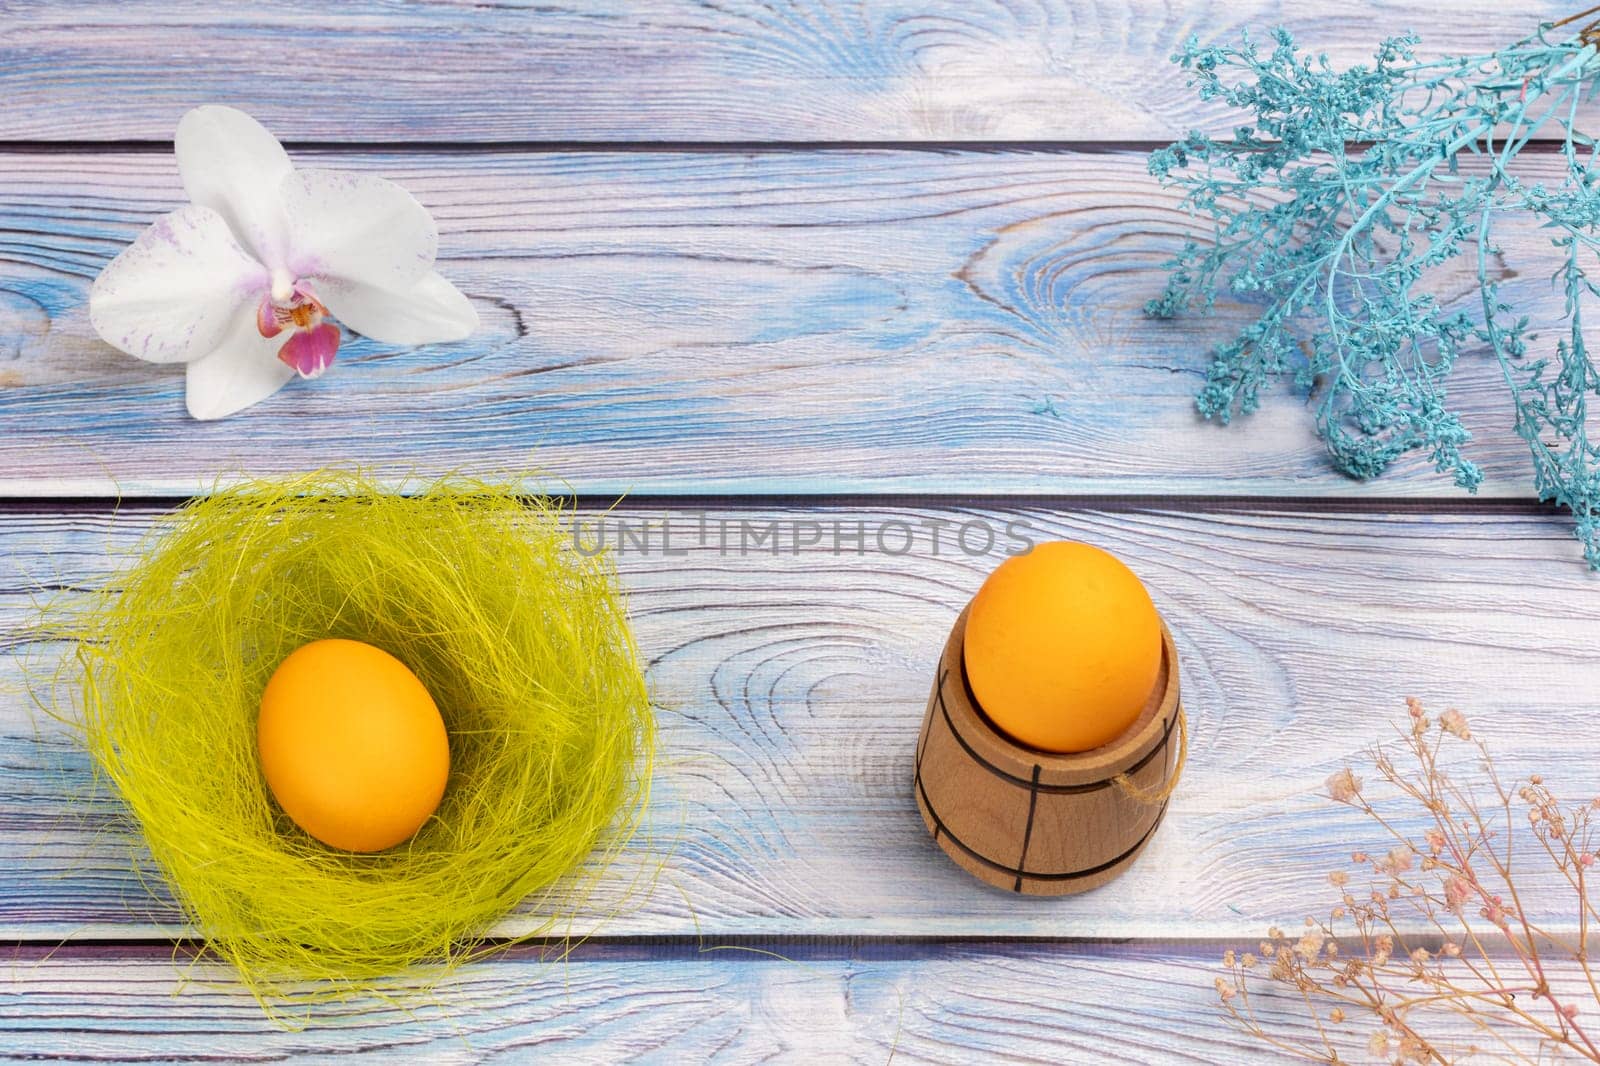 Nest with Easter egg, a small wooden barrel with an egg and an orchid flower on the boards with decorative plants. Top view.